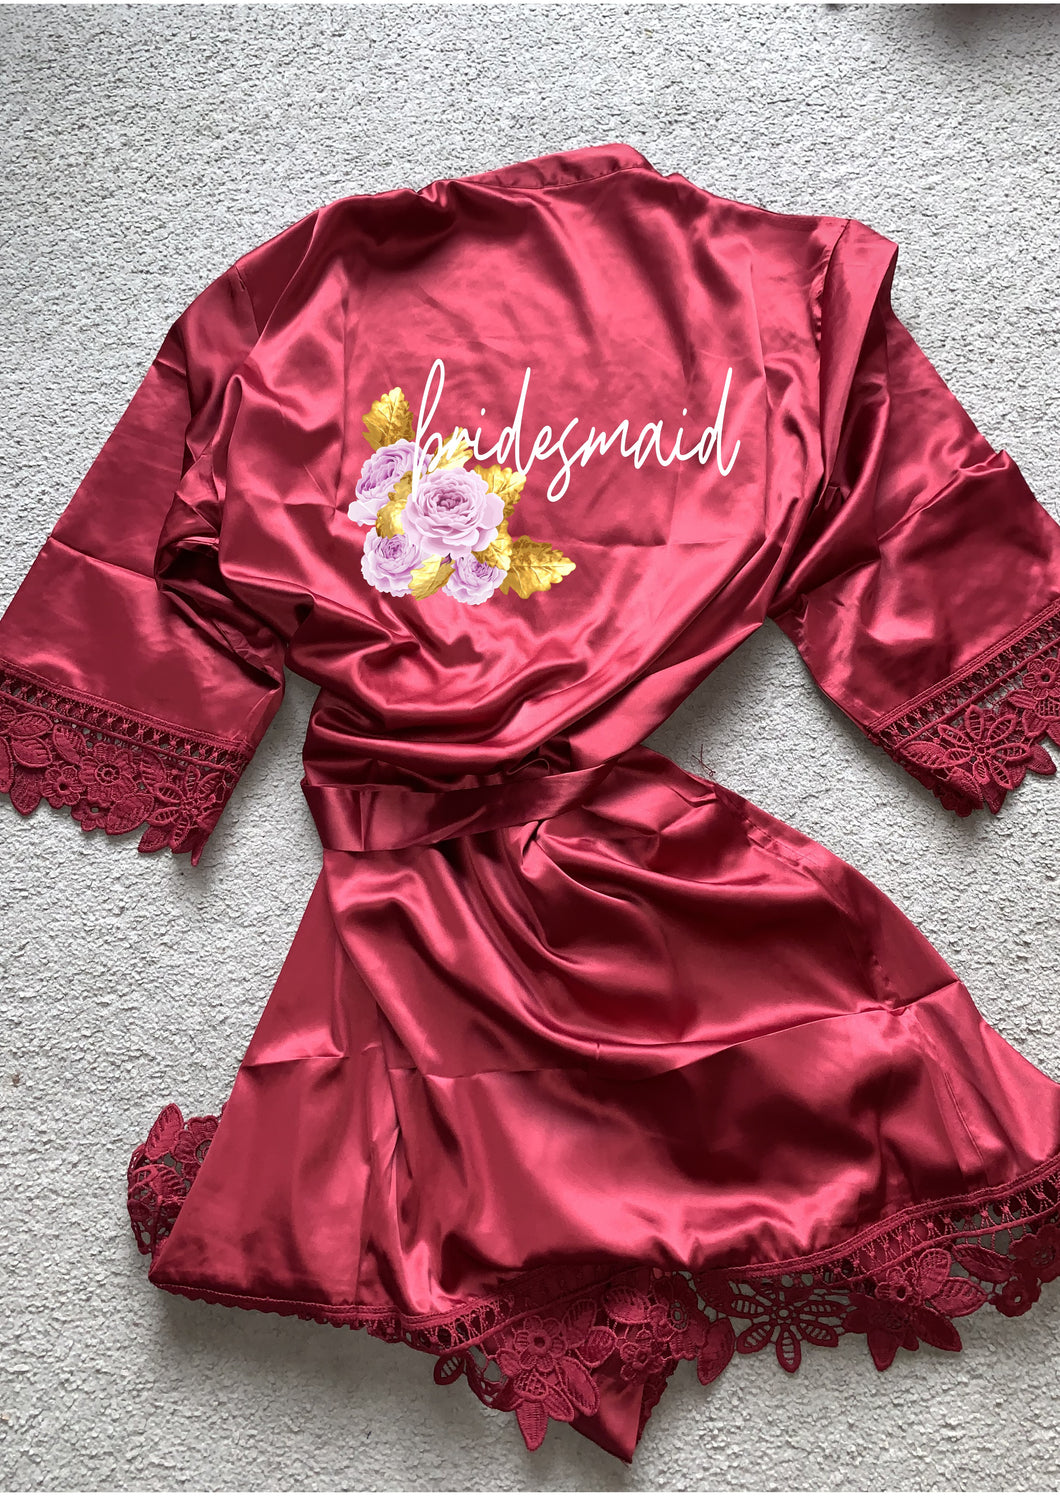 Set of Personalised bridal party robes  floral geometric wreath design  your role  dark red - satin and lace - adults, kids and plus sizes